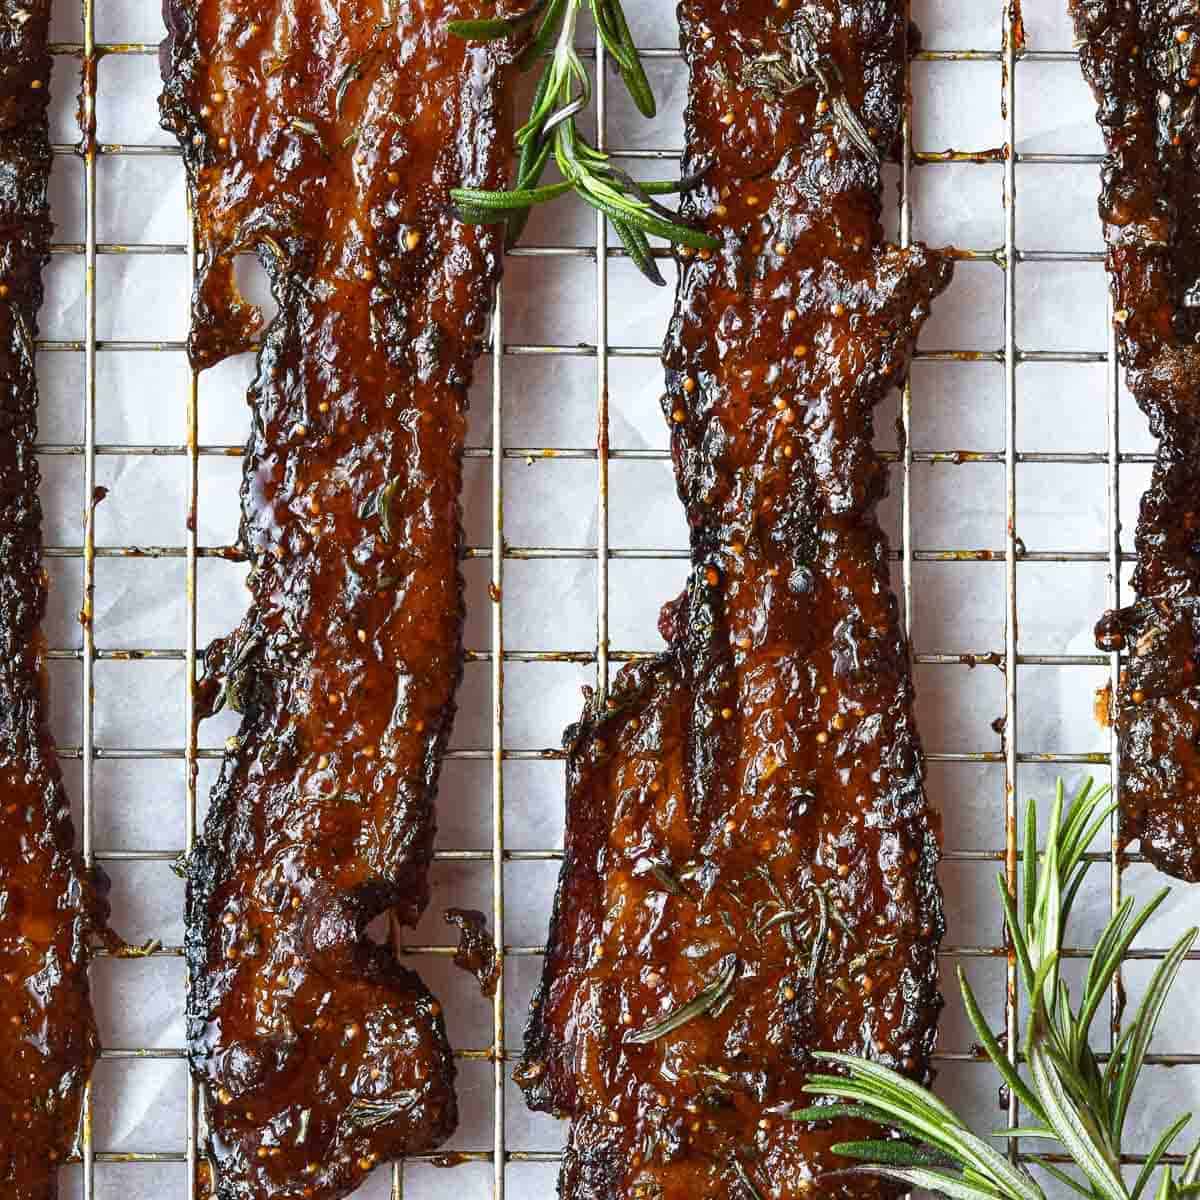 Strips of caramelized bacon on a cooling rack with sprigs of rosemary around.